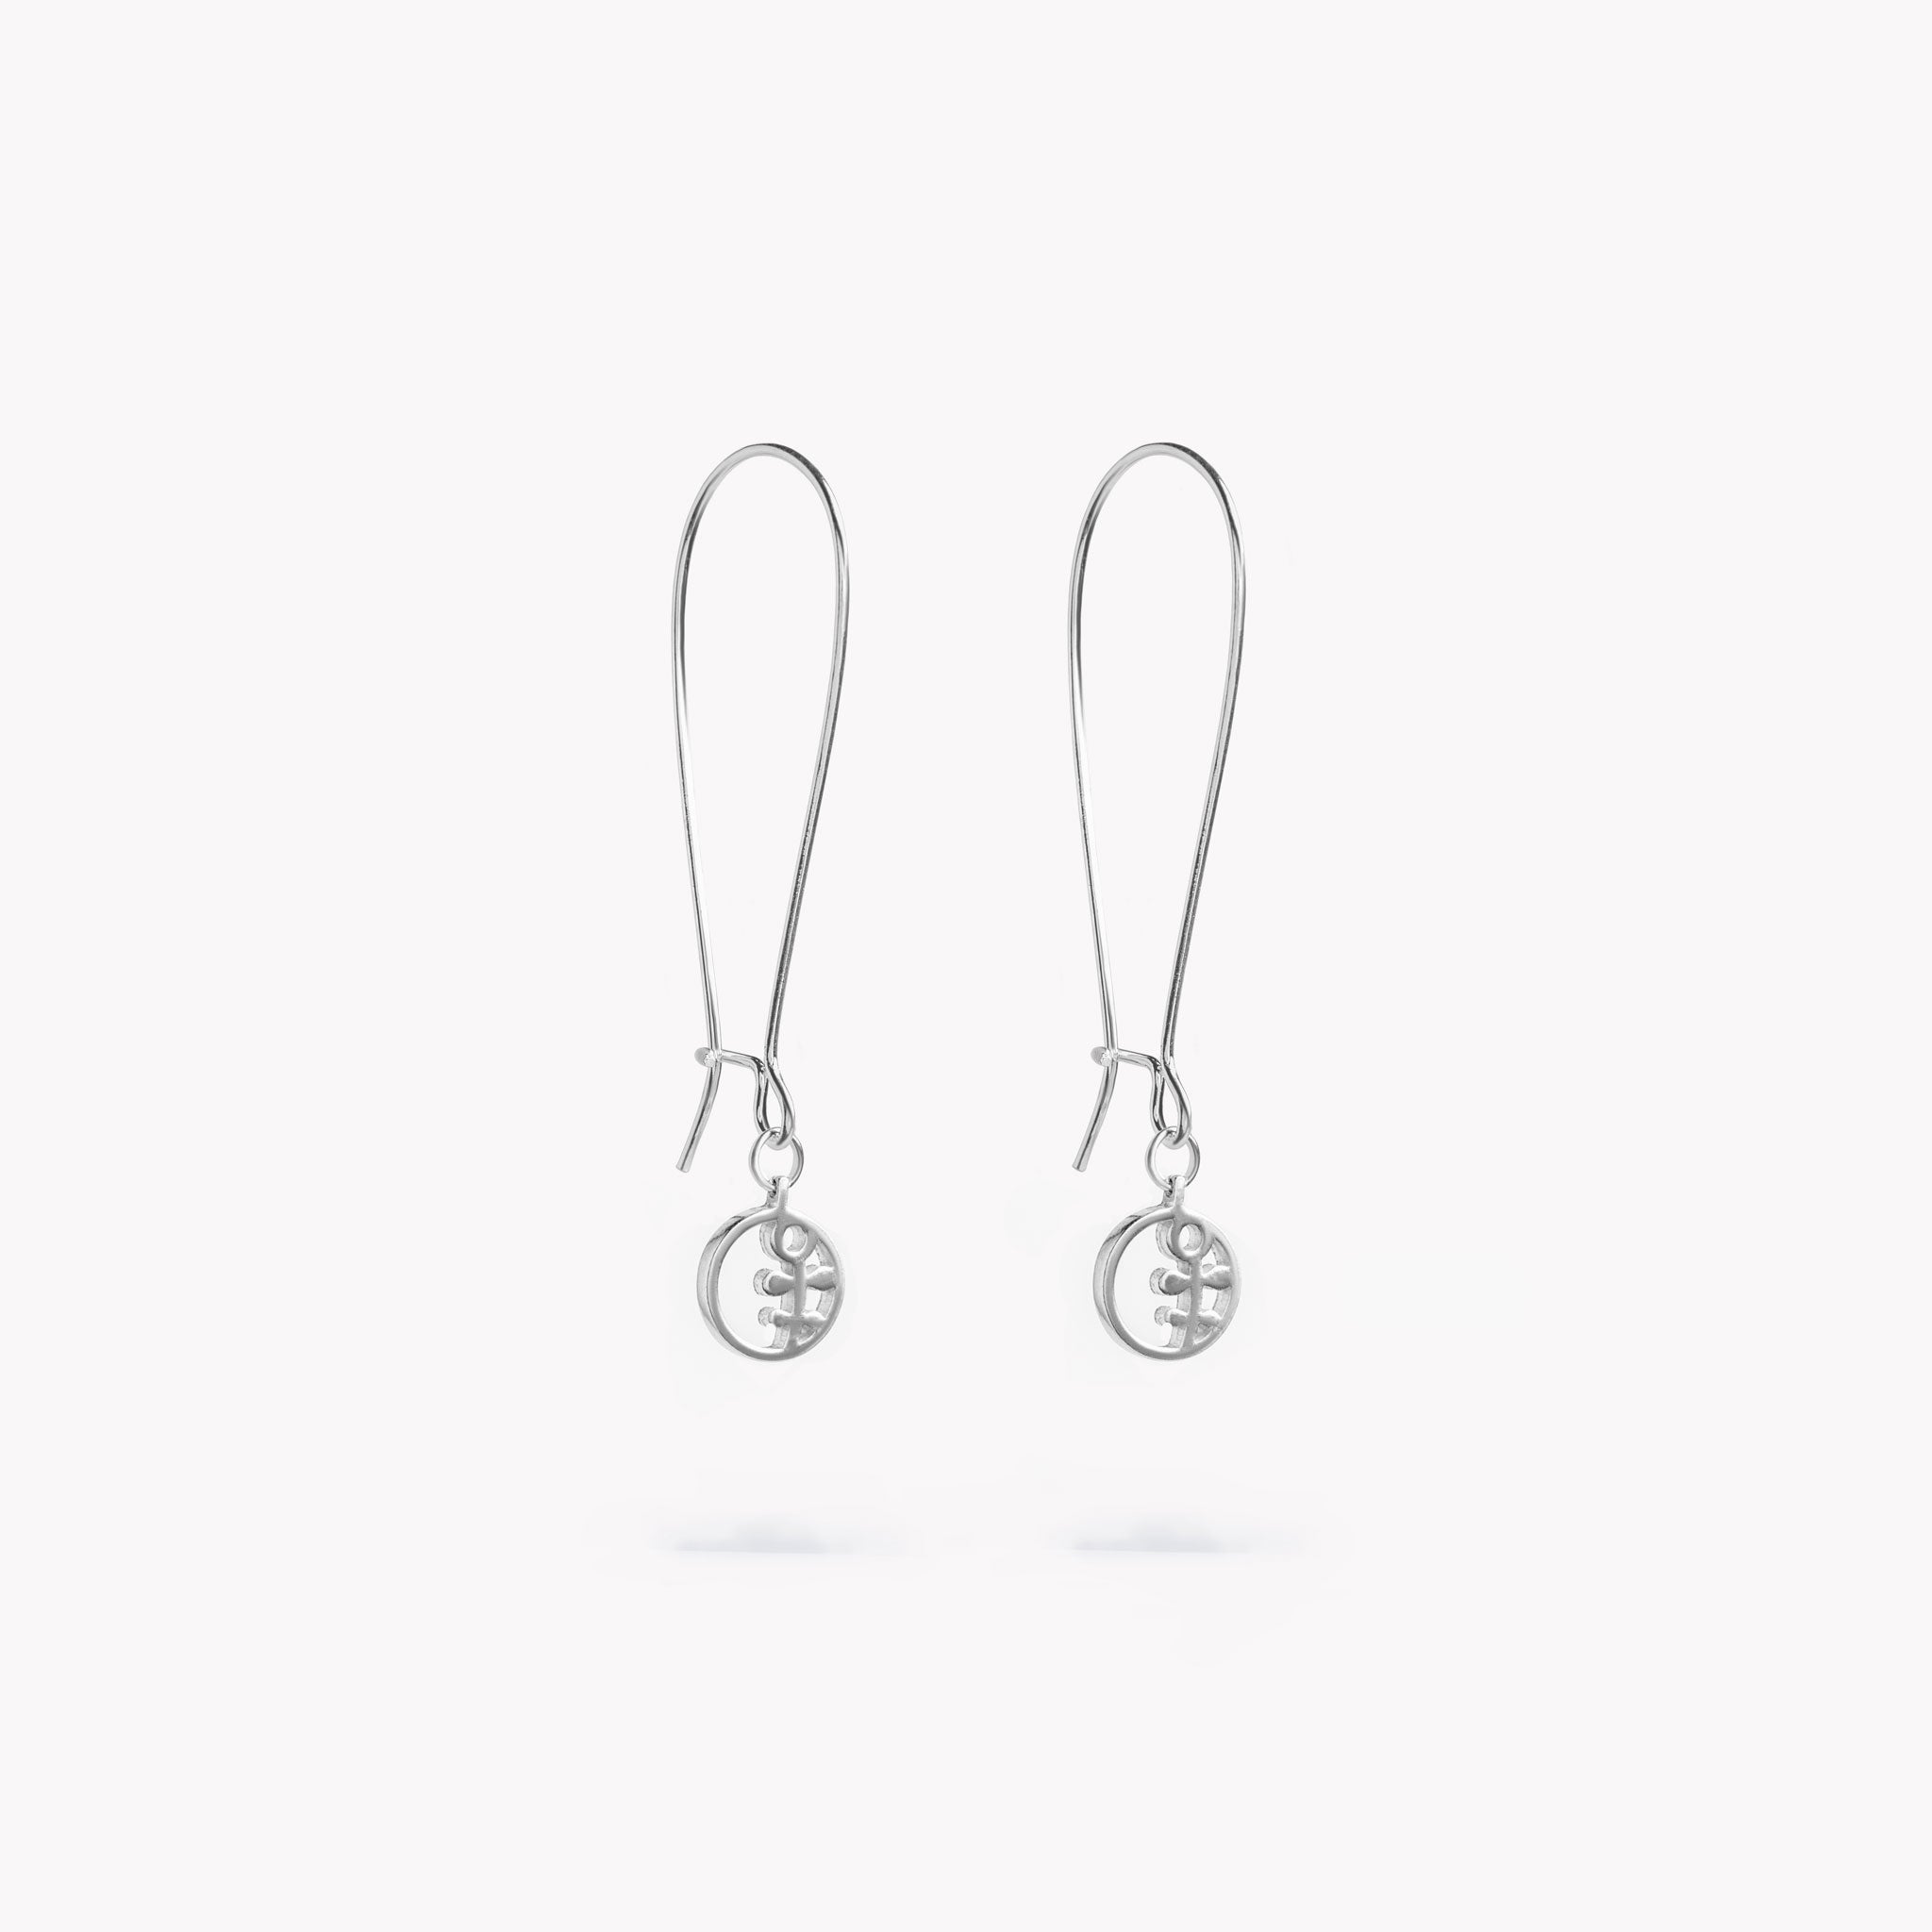 A delicate pair of circular drop earrings with a simple flower stem design.